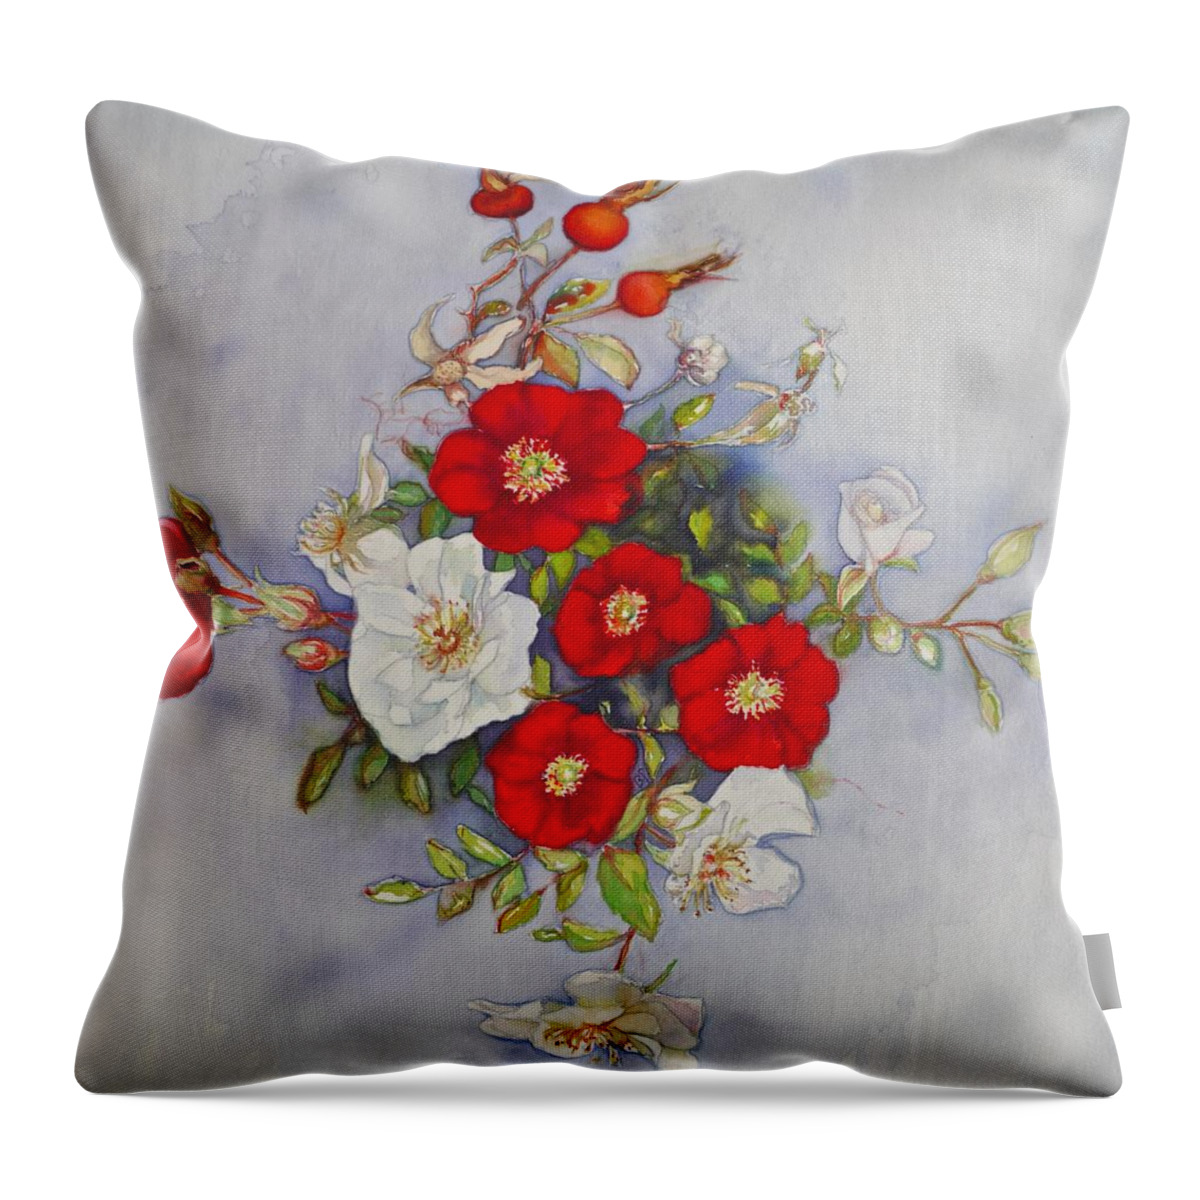 Comapss Rose Throw Pillow featuring the painting Compass Rose by Barbara Pease